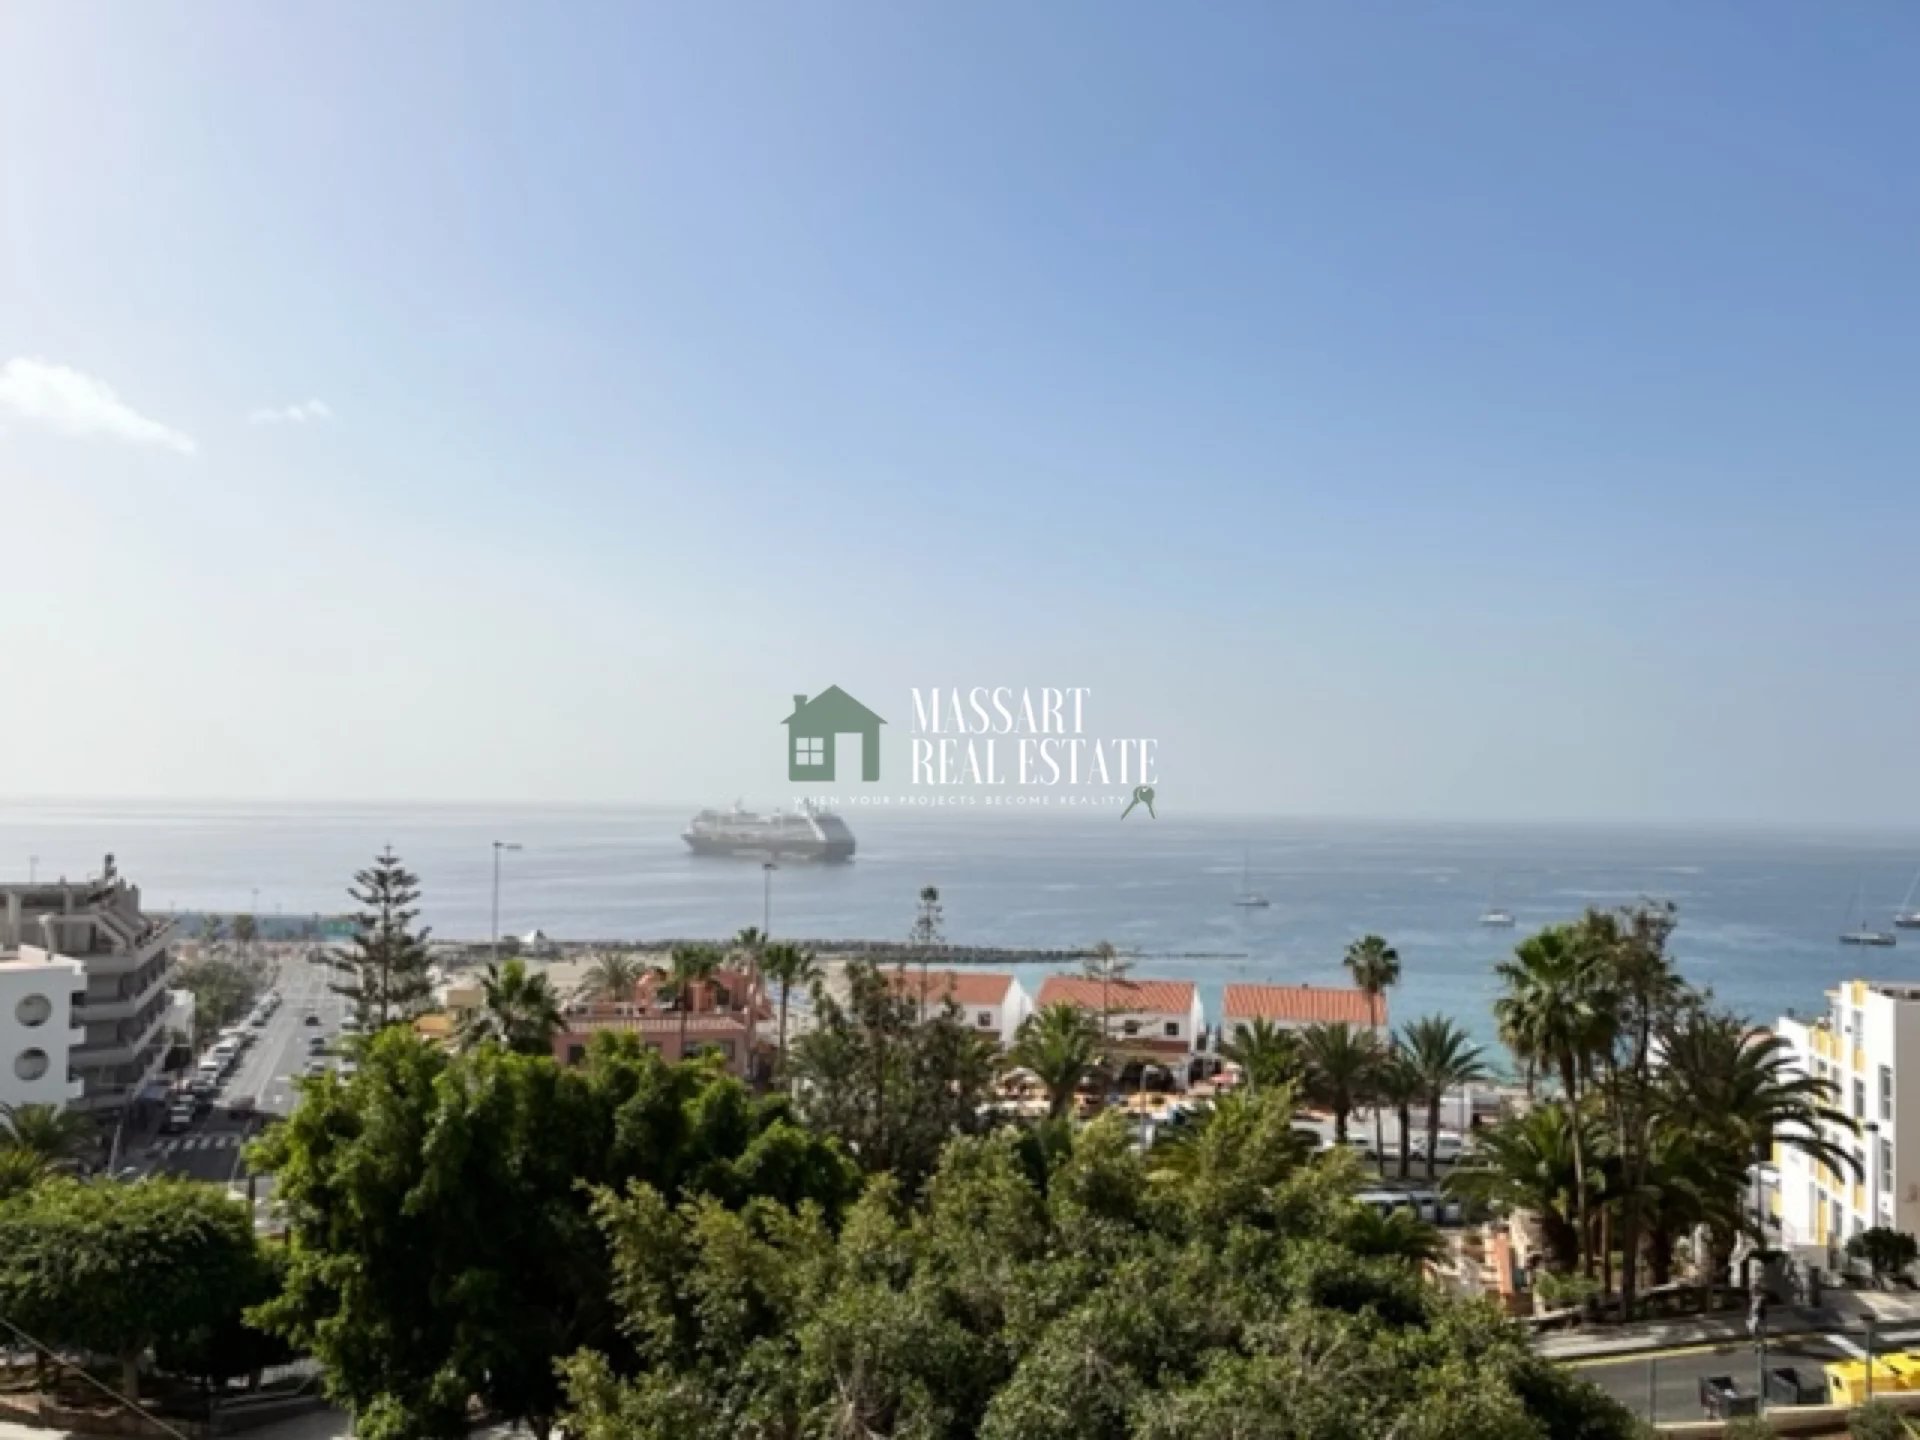 Building distributed over 3 floors of about 115-120 m2 each... very close to the popular area of ​​San Telmo, in Los Cristianos.